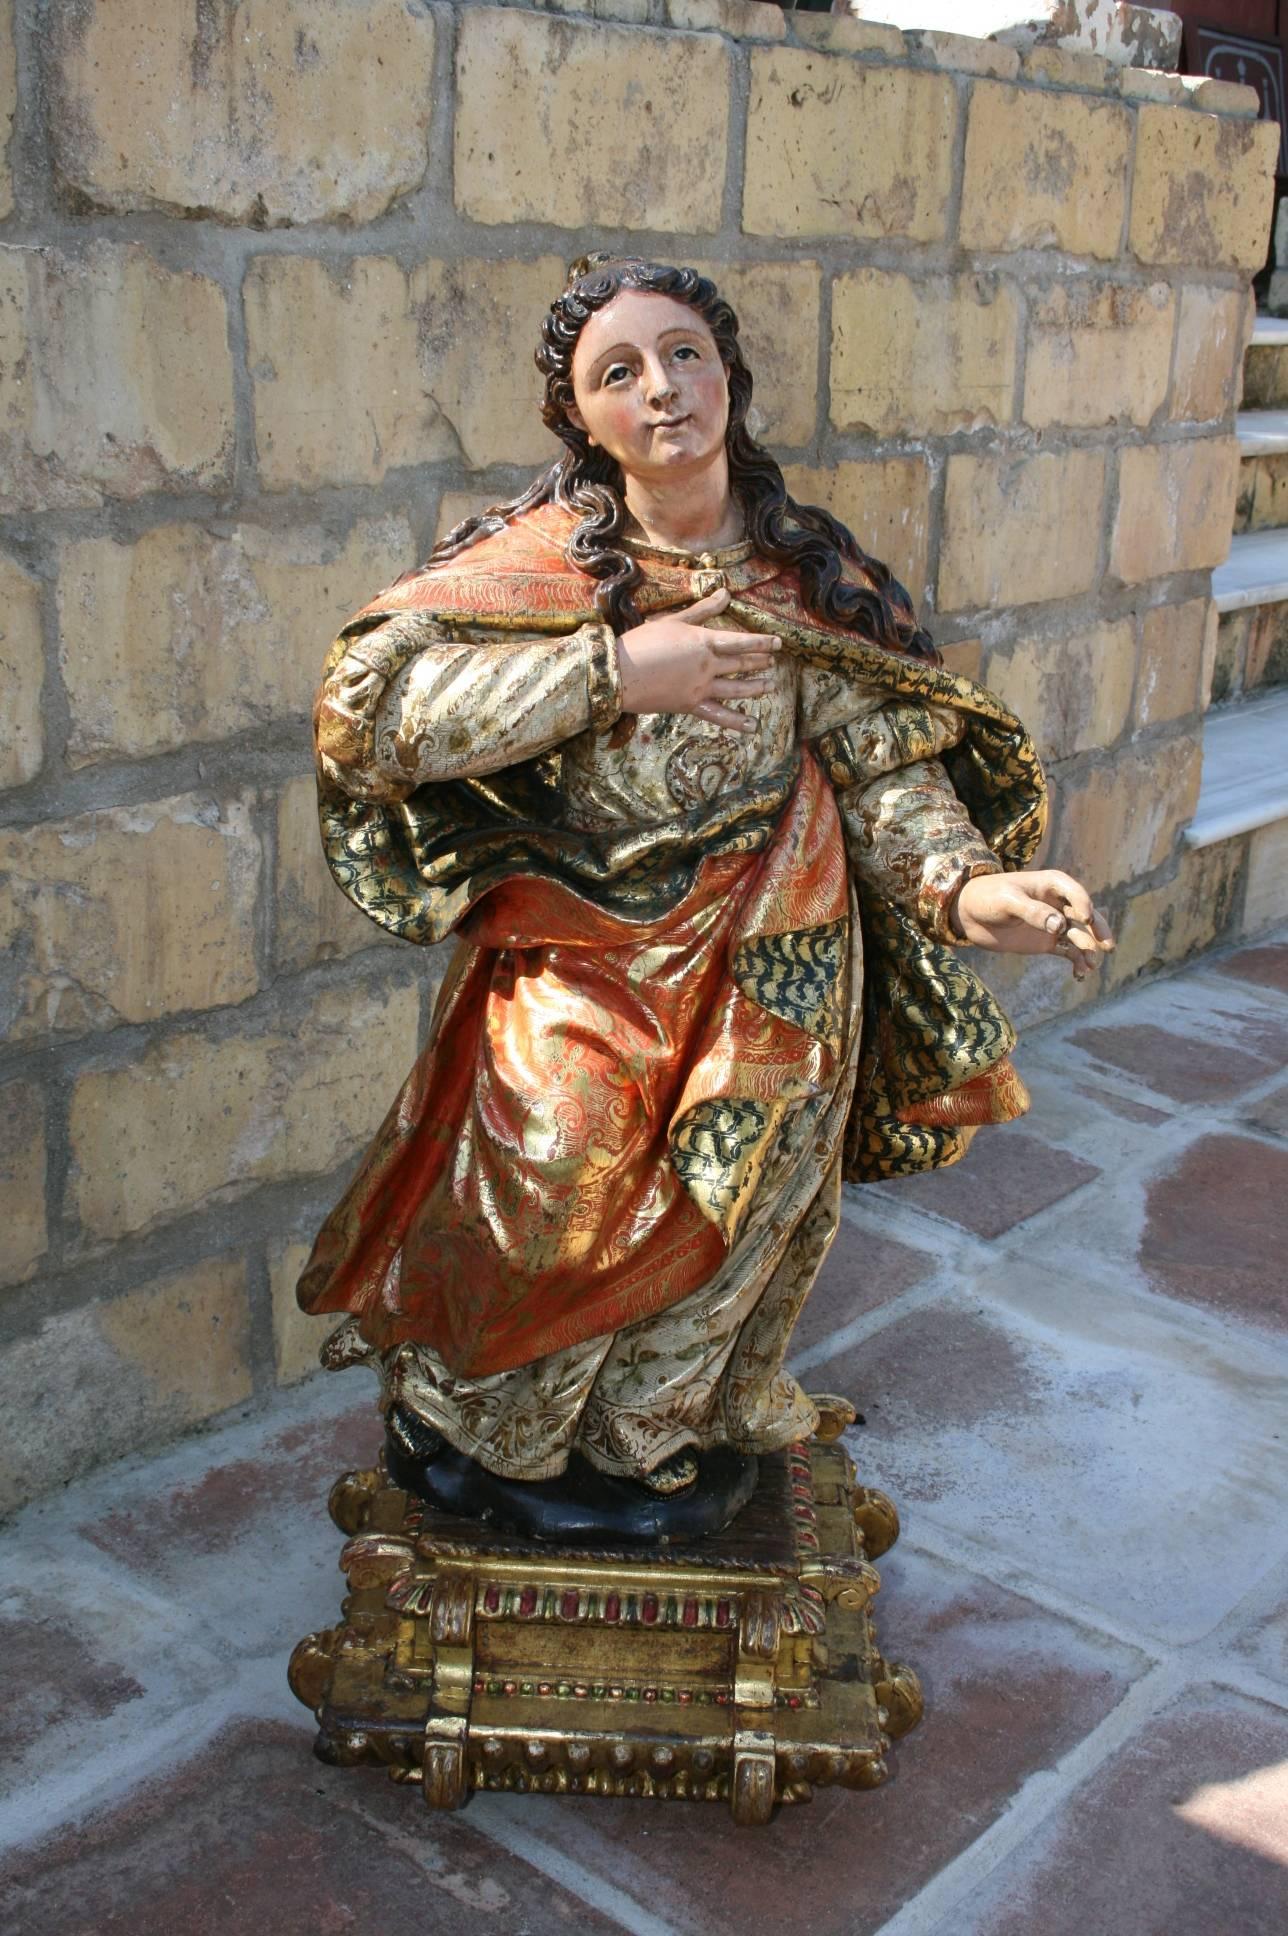 18th Century and Earlier Polychrome Sculpture of the 17th Century, from the Castilian Area